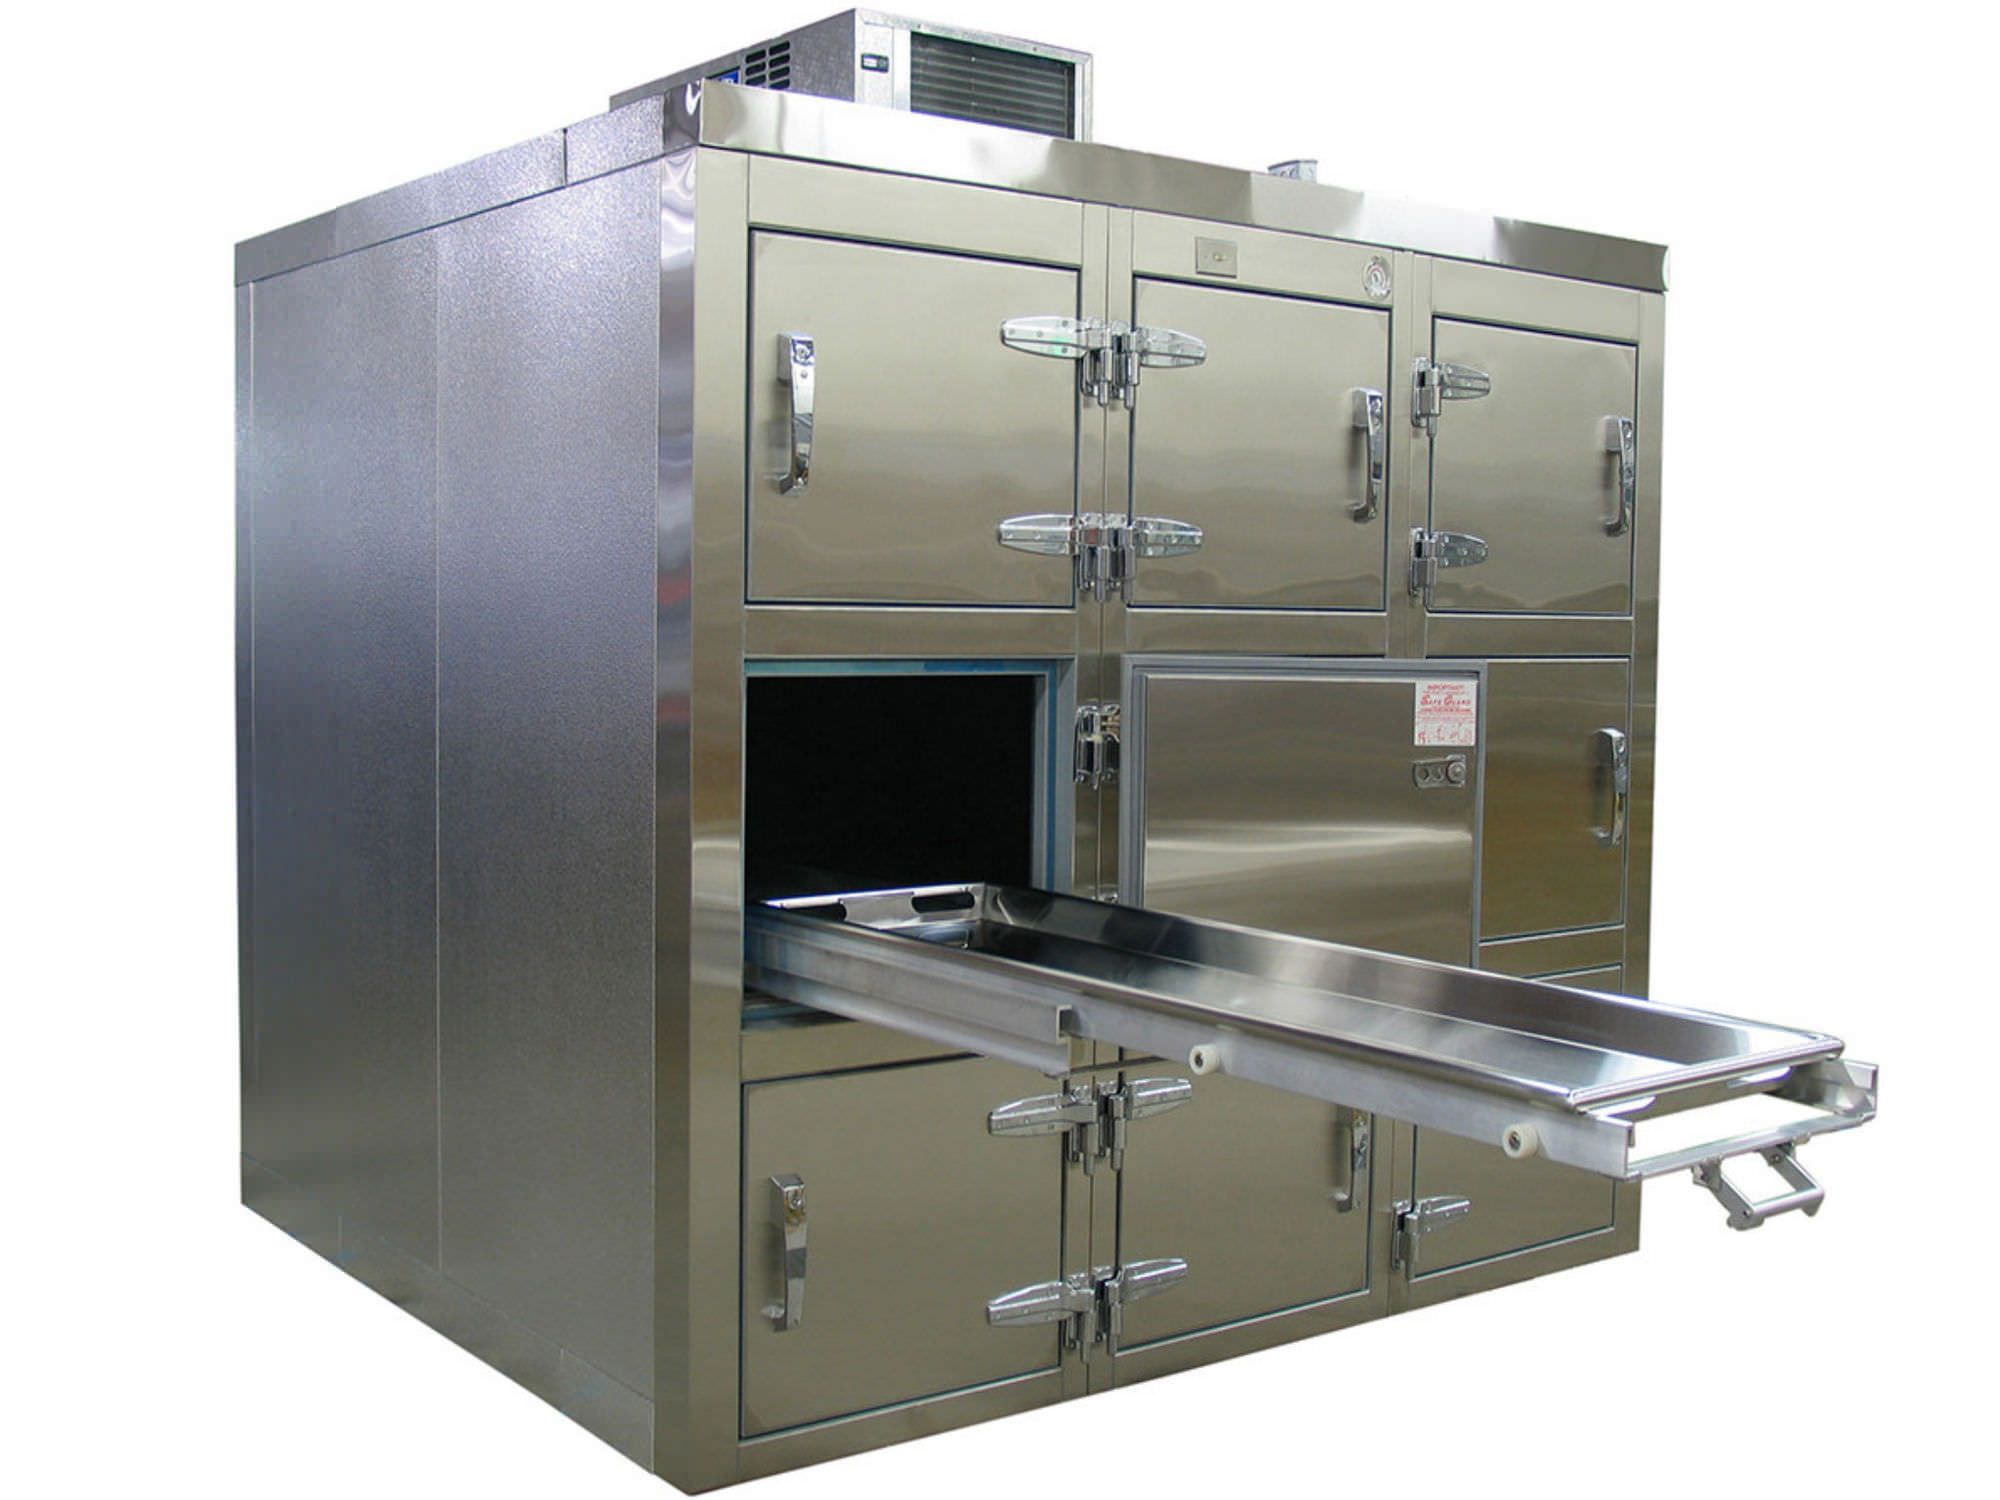 9-body refrigerated mortuary cabinet 38°F | 1036-R112 Mortech Manufacturing